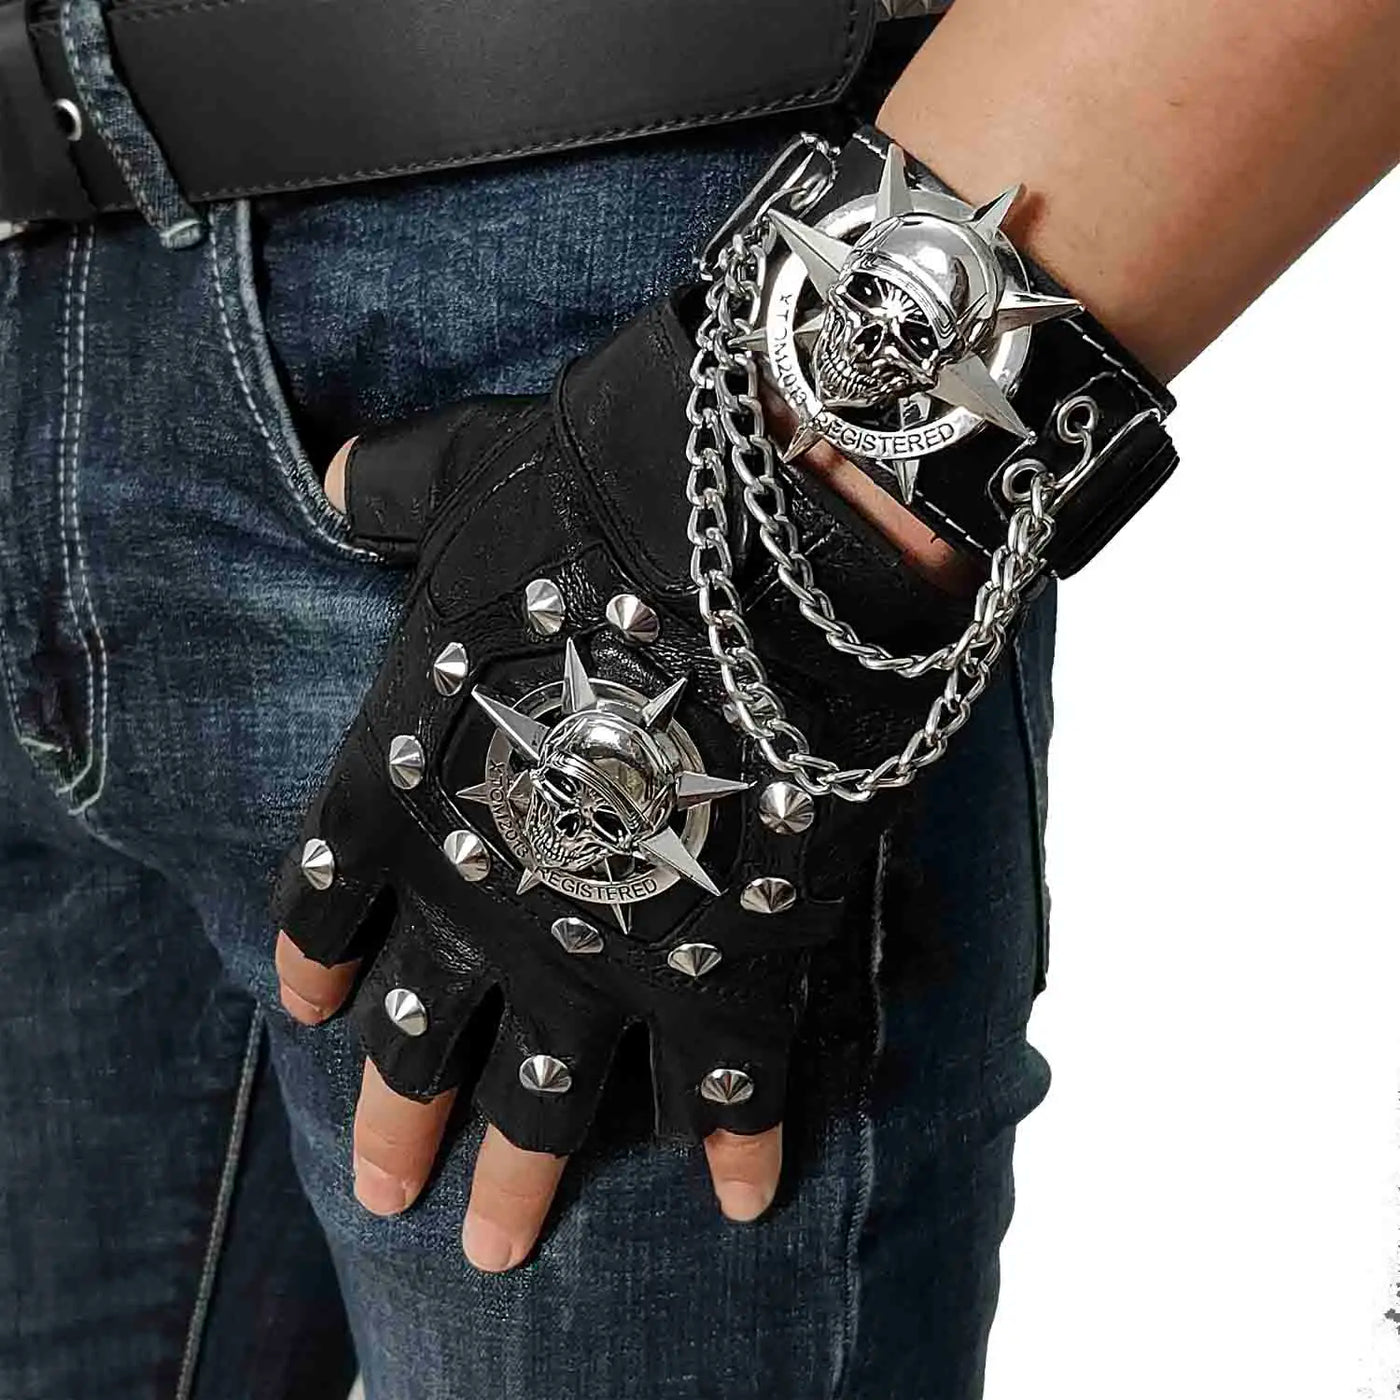 A man sporting Men's Skull Steampunk Biker Leather Gloves adorned with chains and studs, channeling a hint of punk rock attitude.